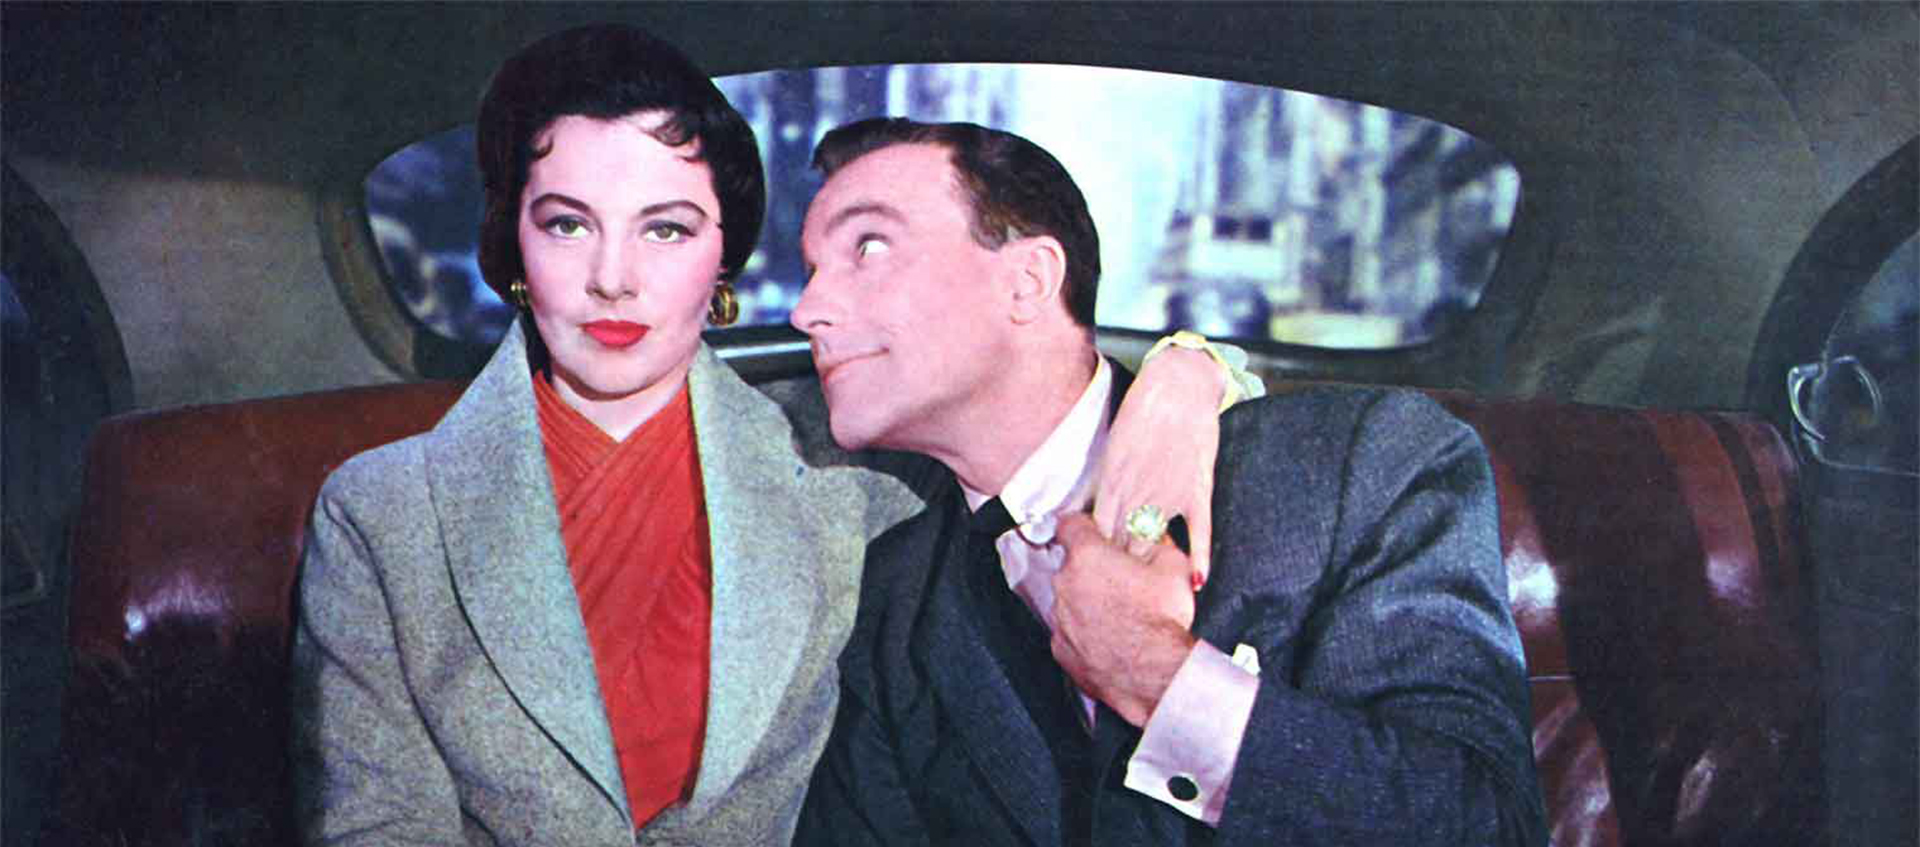 A couple sits in the backseat of a car. A woman with black hair pulled back in a gray jacket and red shirt has her arm around the shoulder of a man in a gray suit who looks longingly at her.